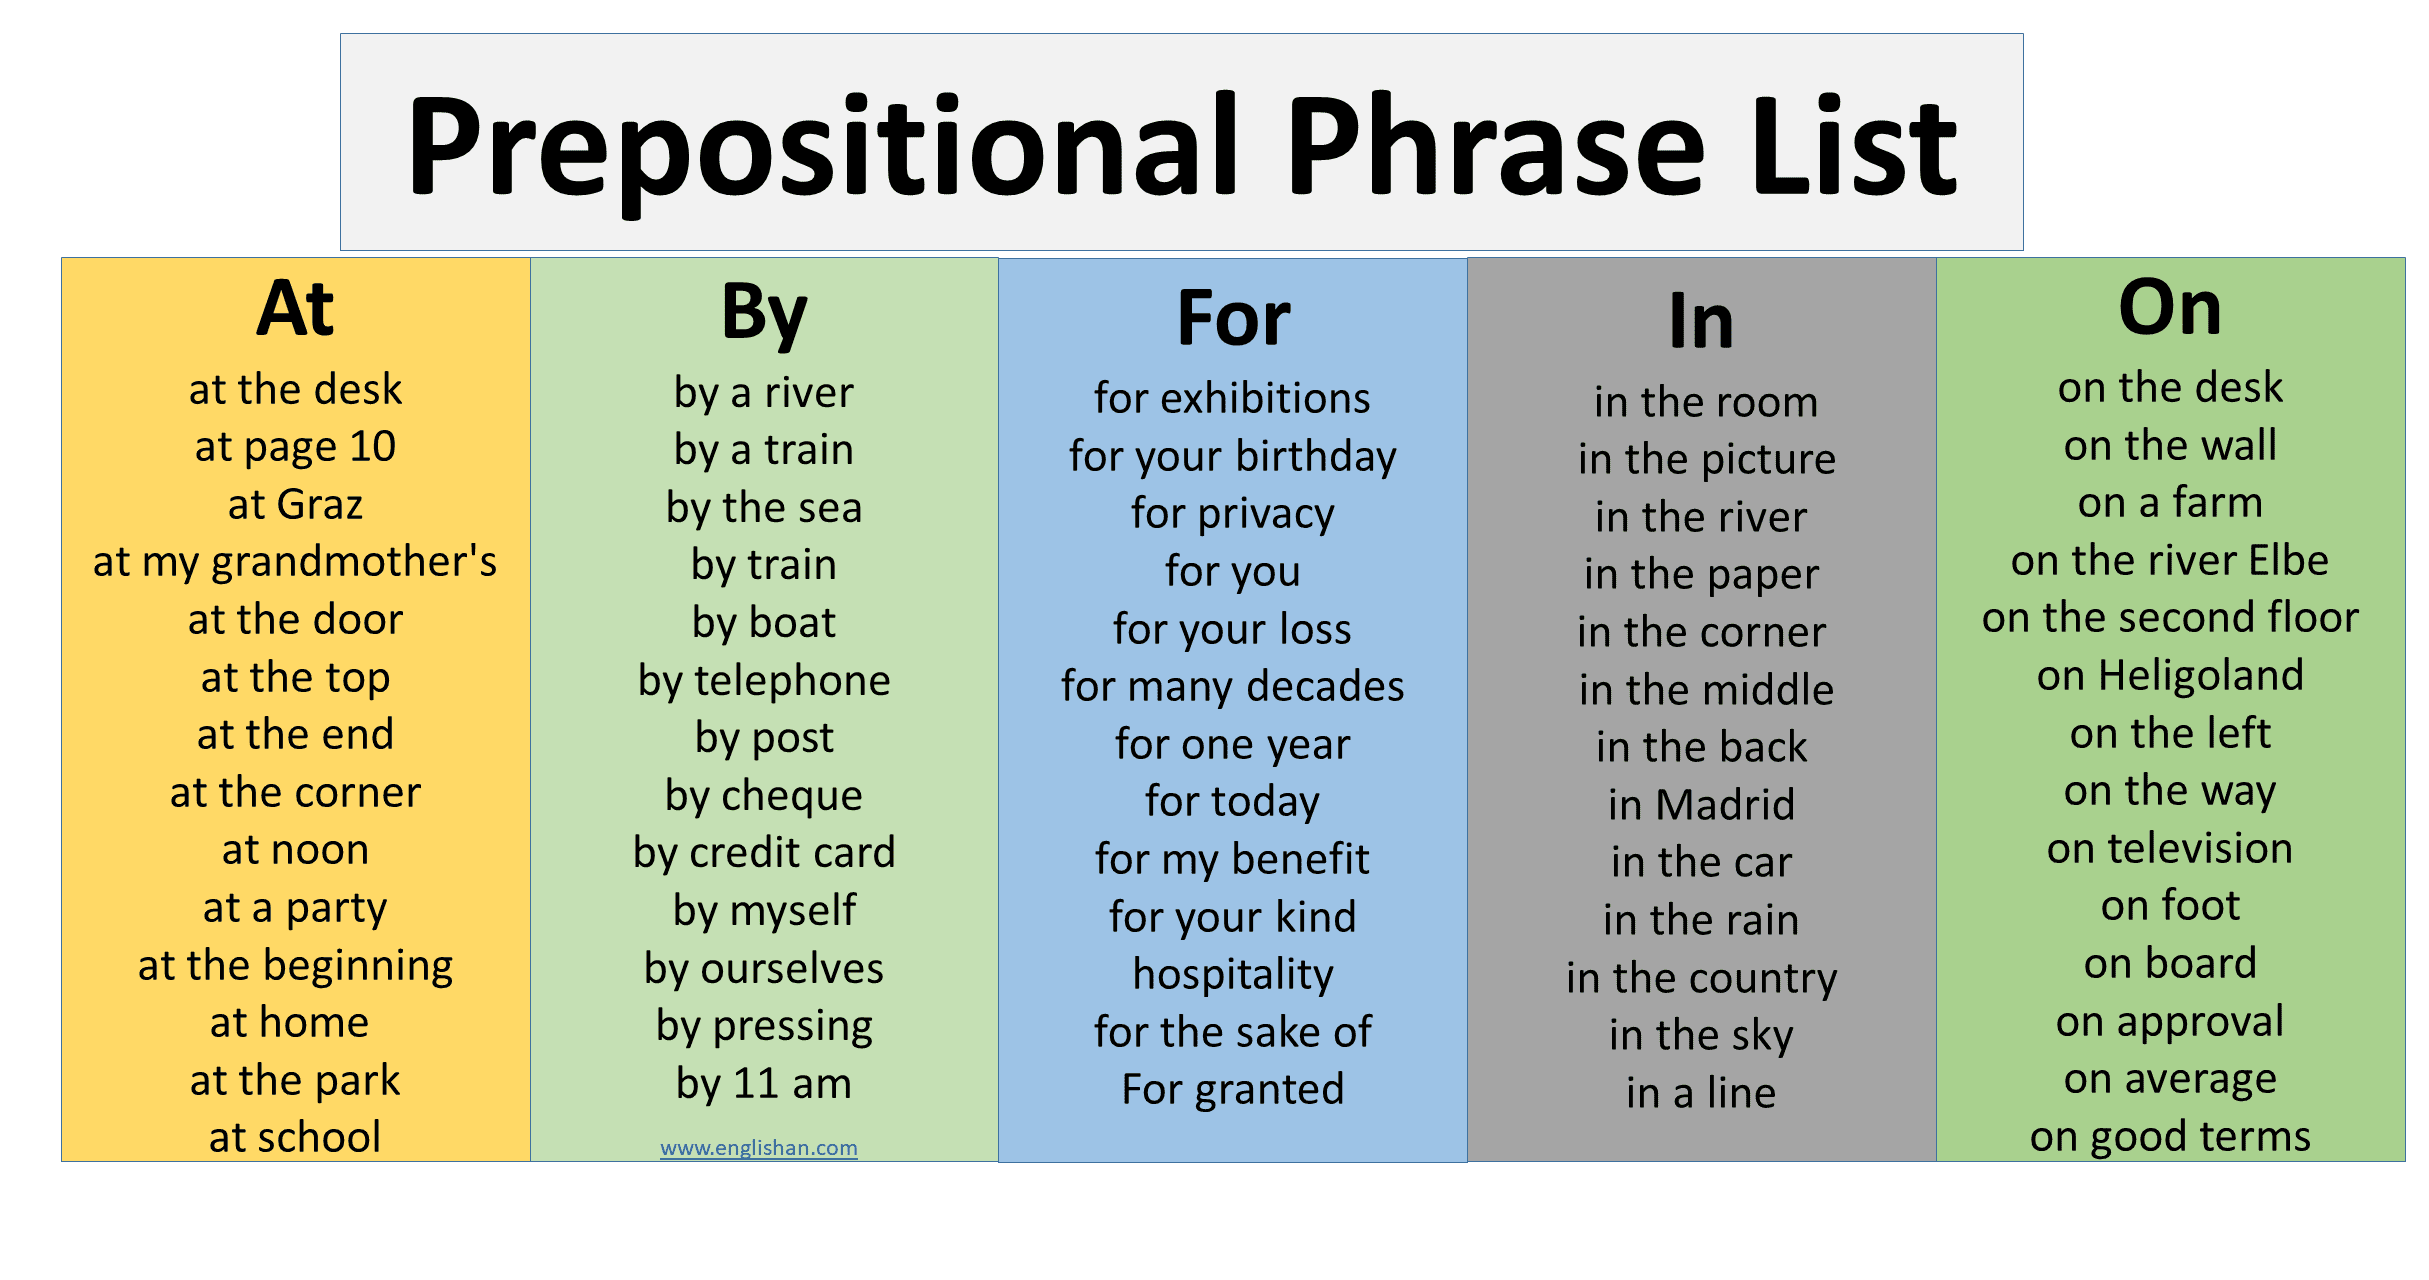 Find The Prepositional Phrase